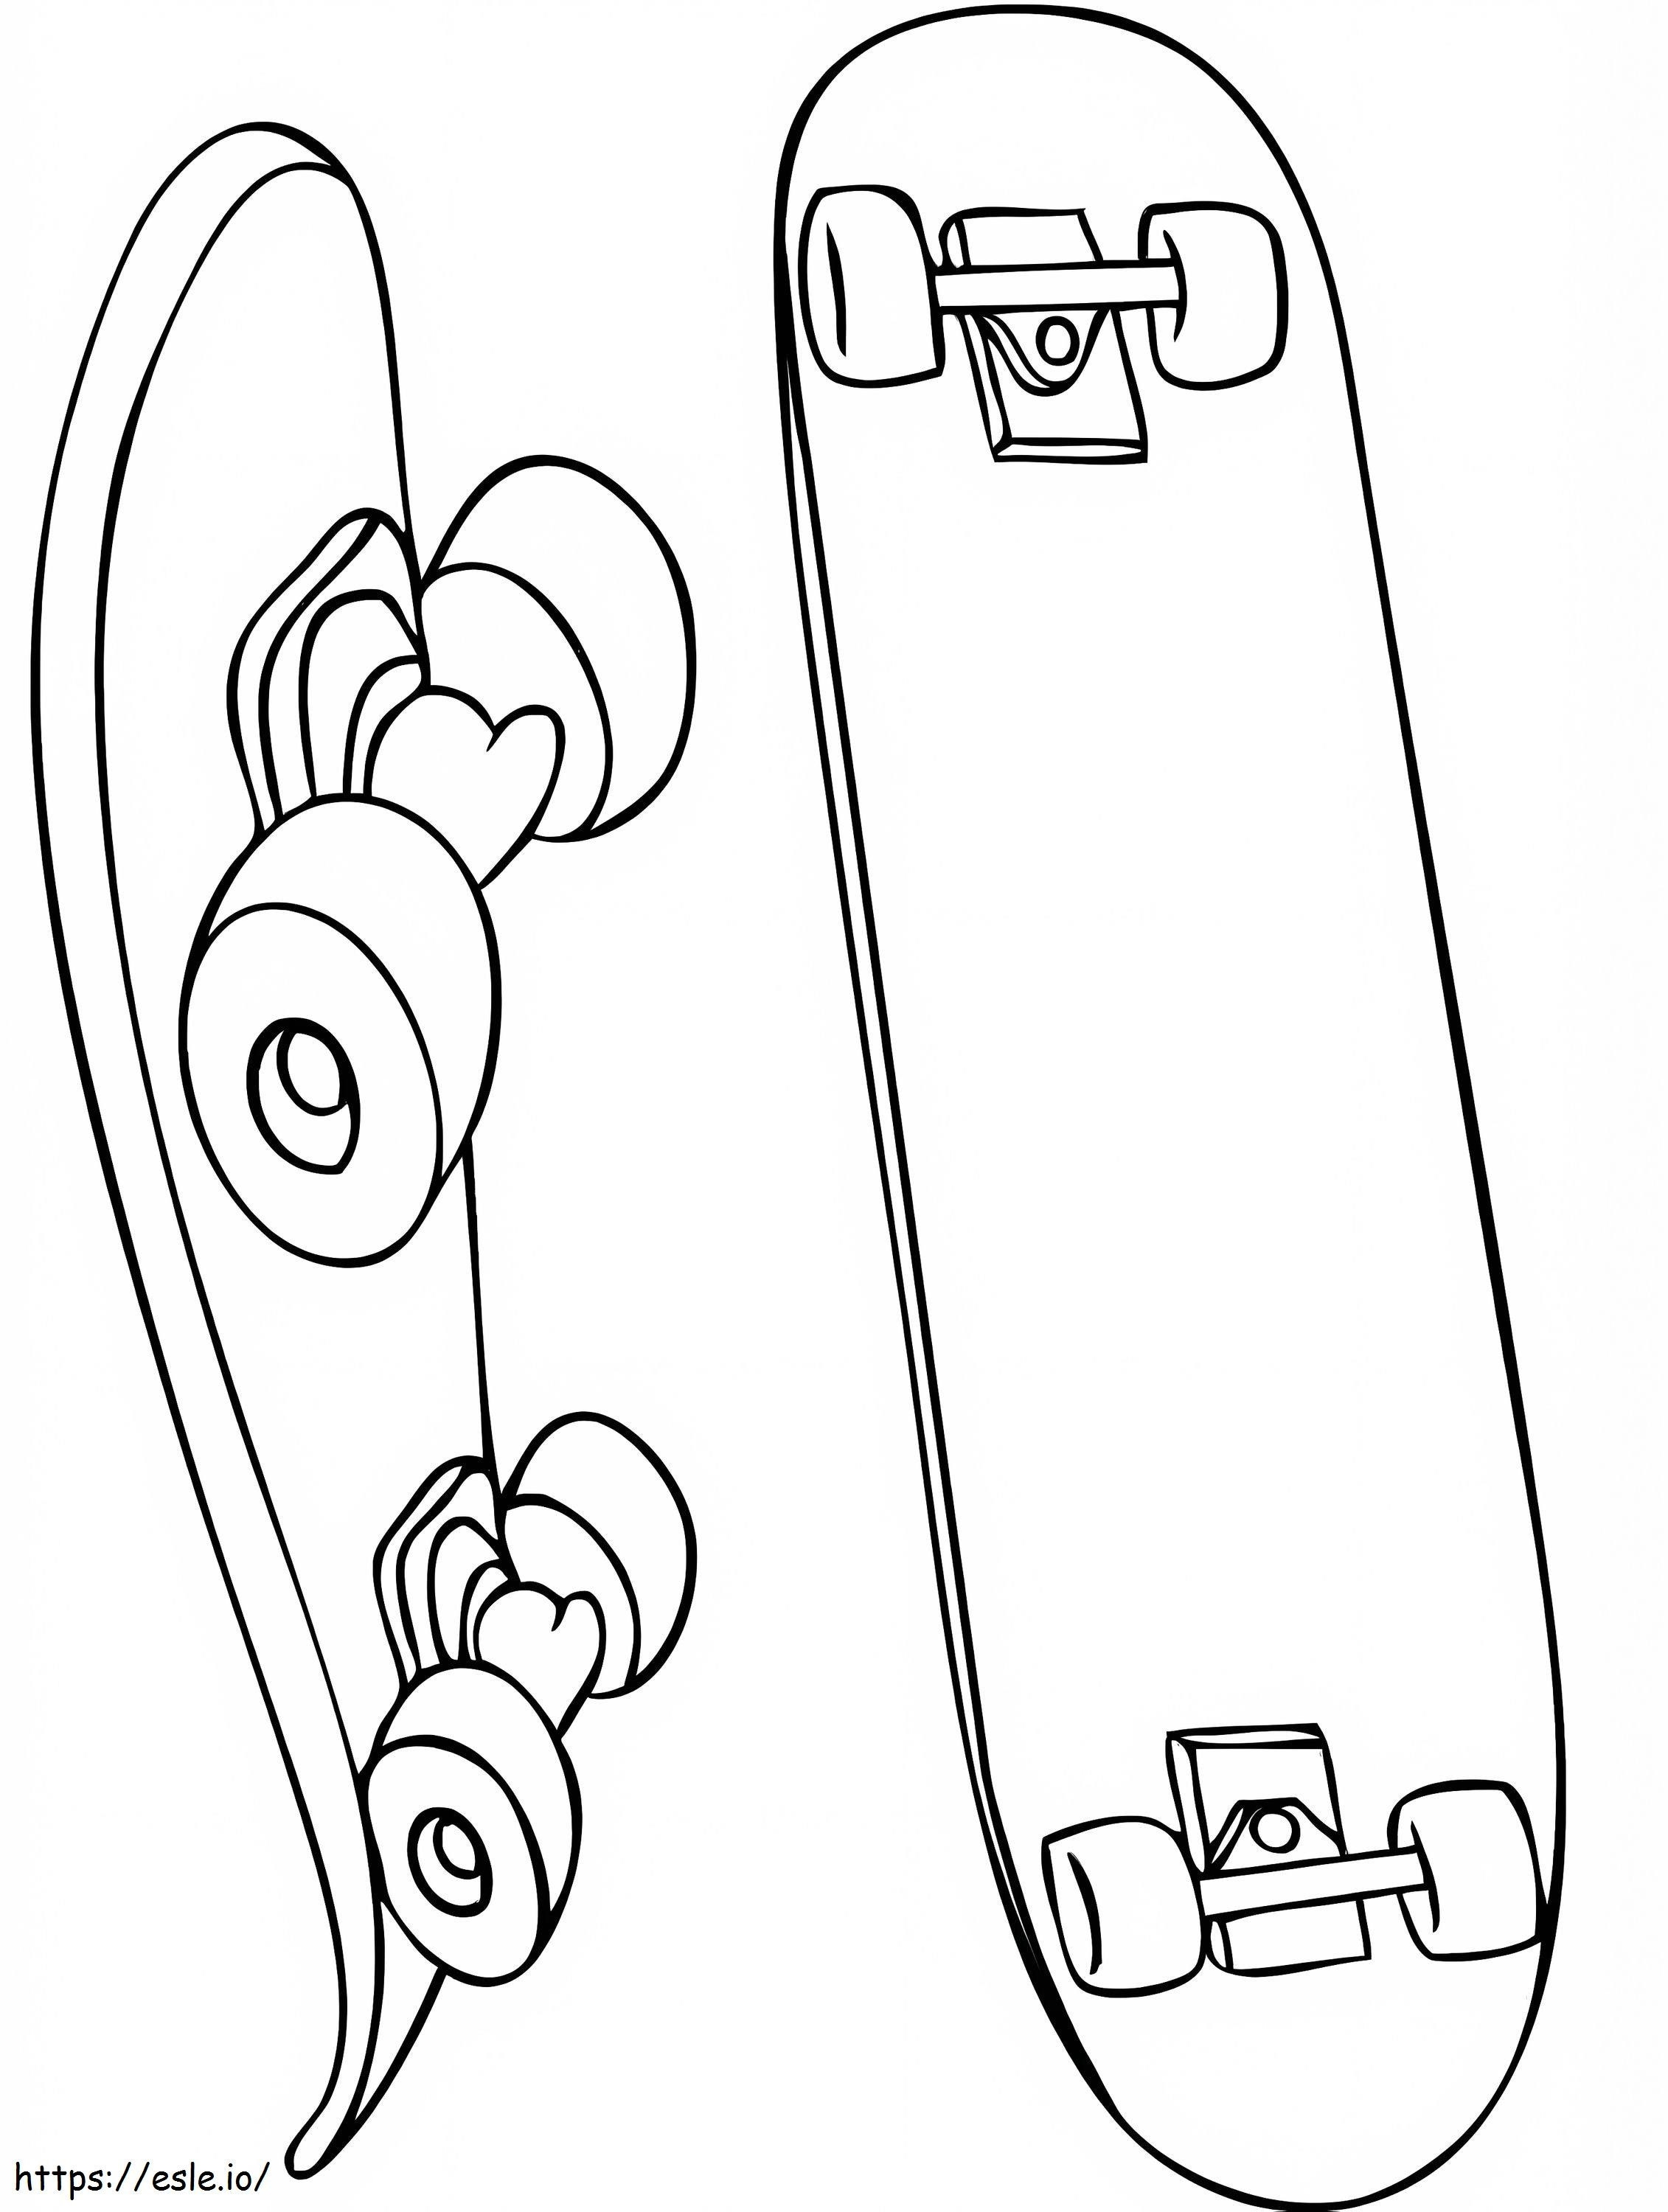 Two Skateboards coloring page